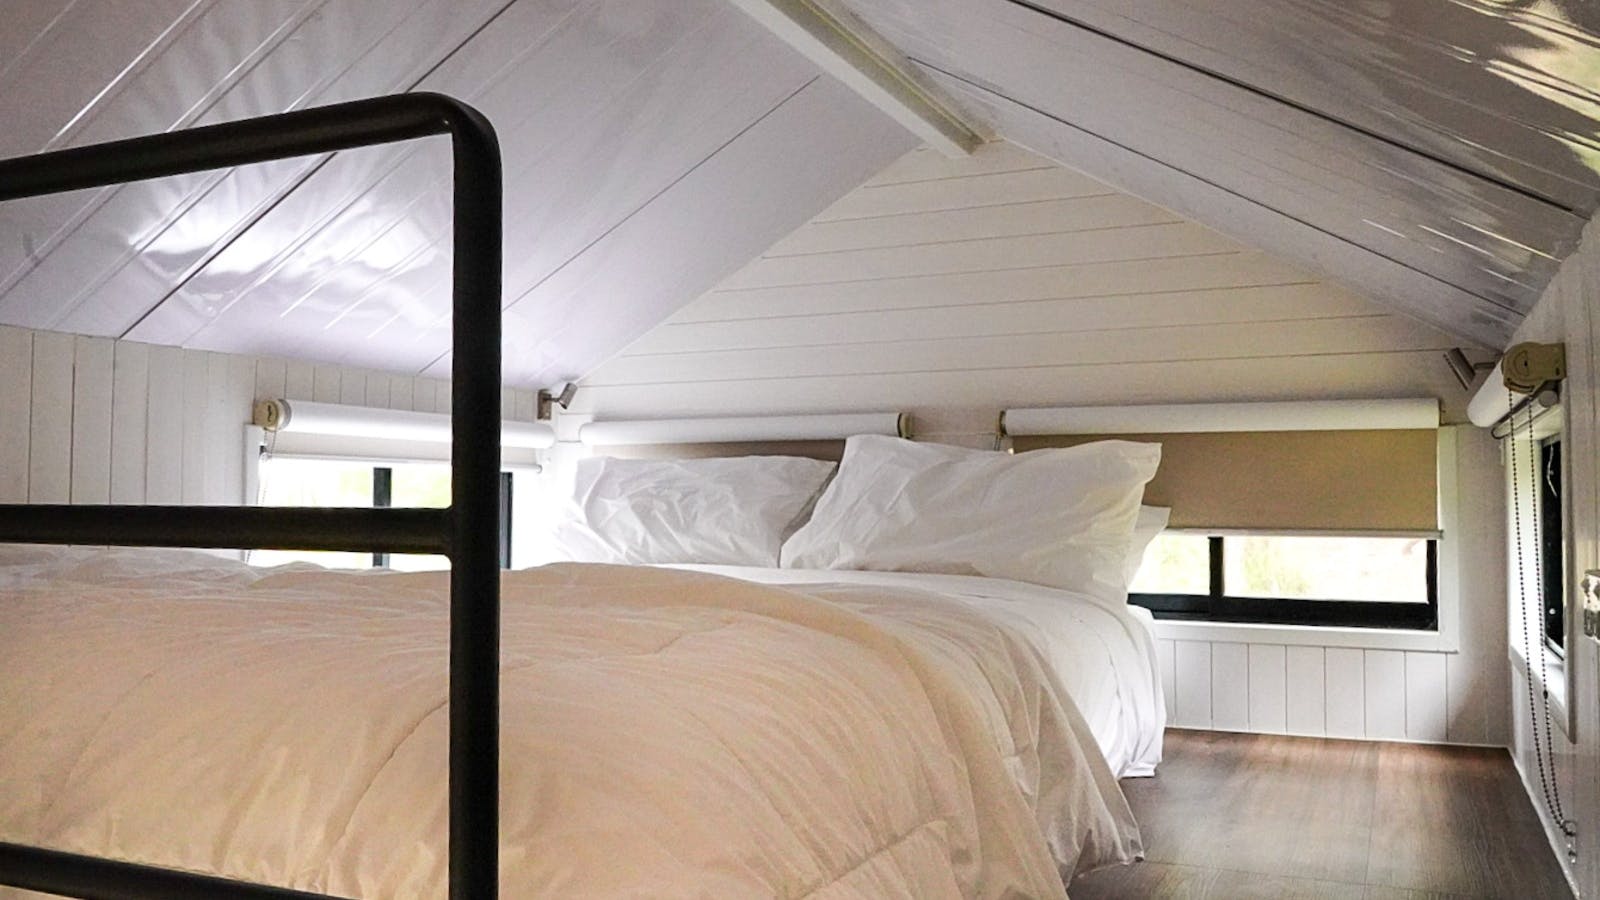 A cosy, queen-sized bed awaits you in the loft